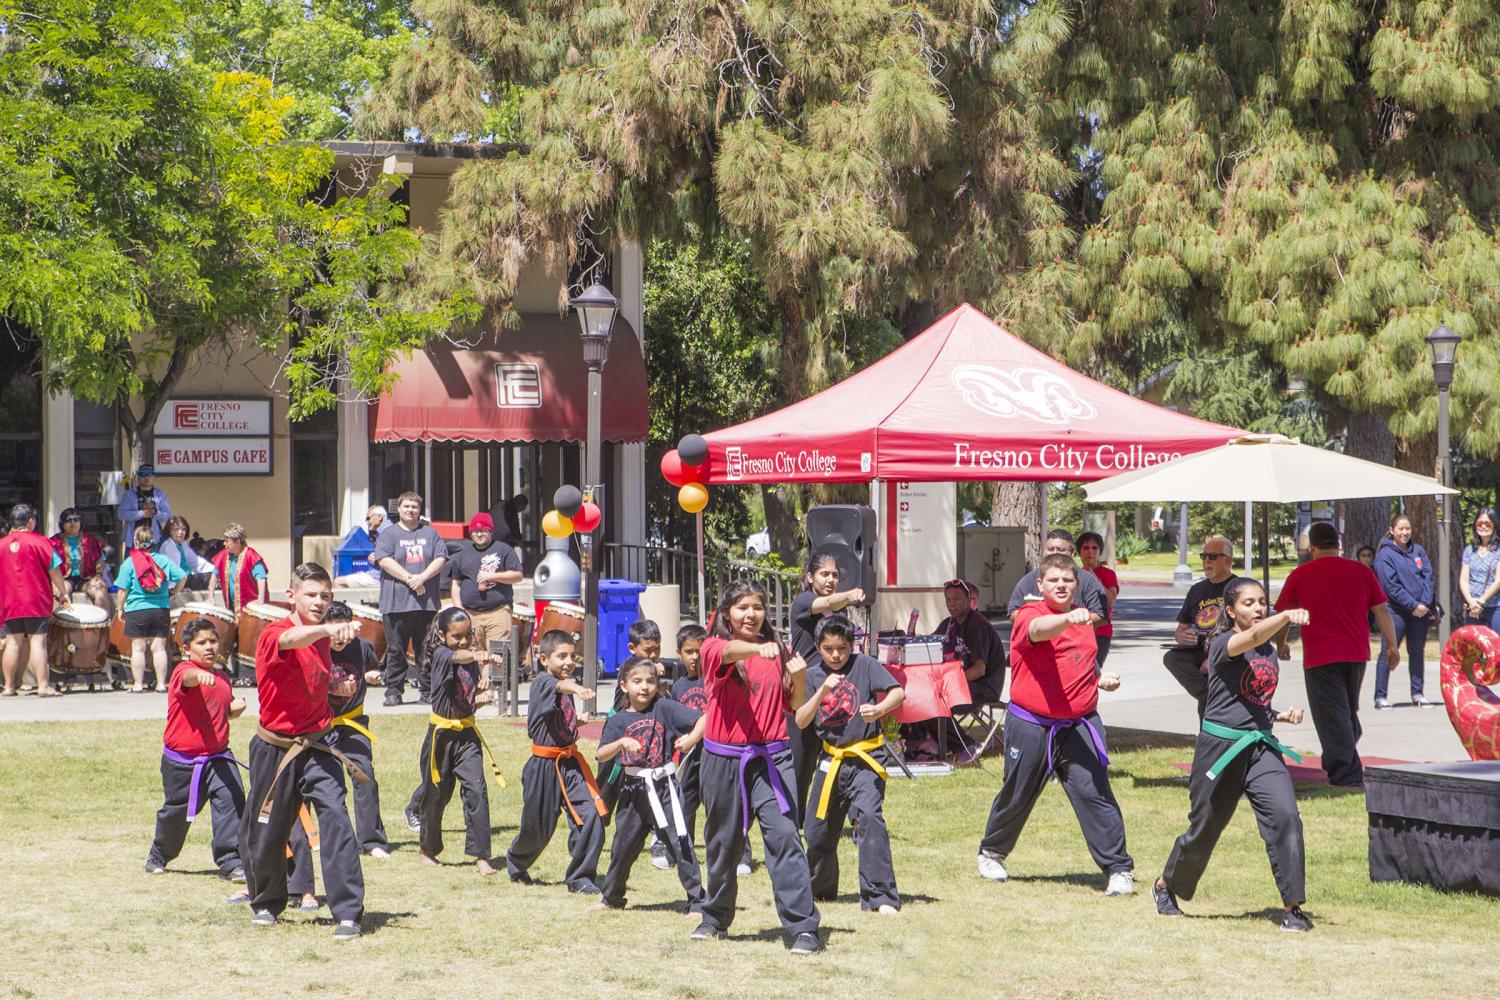 Students from the Red Dragon Dojo demonstrate their moves at Asian Fest on April 20, 2017.